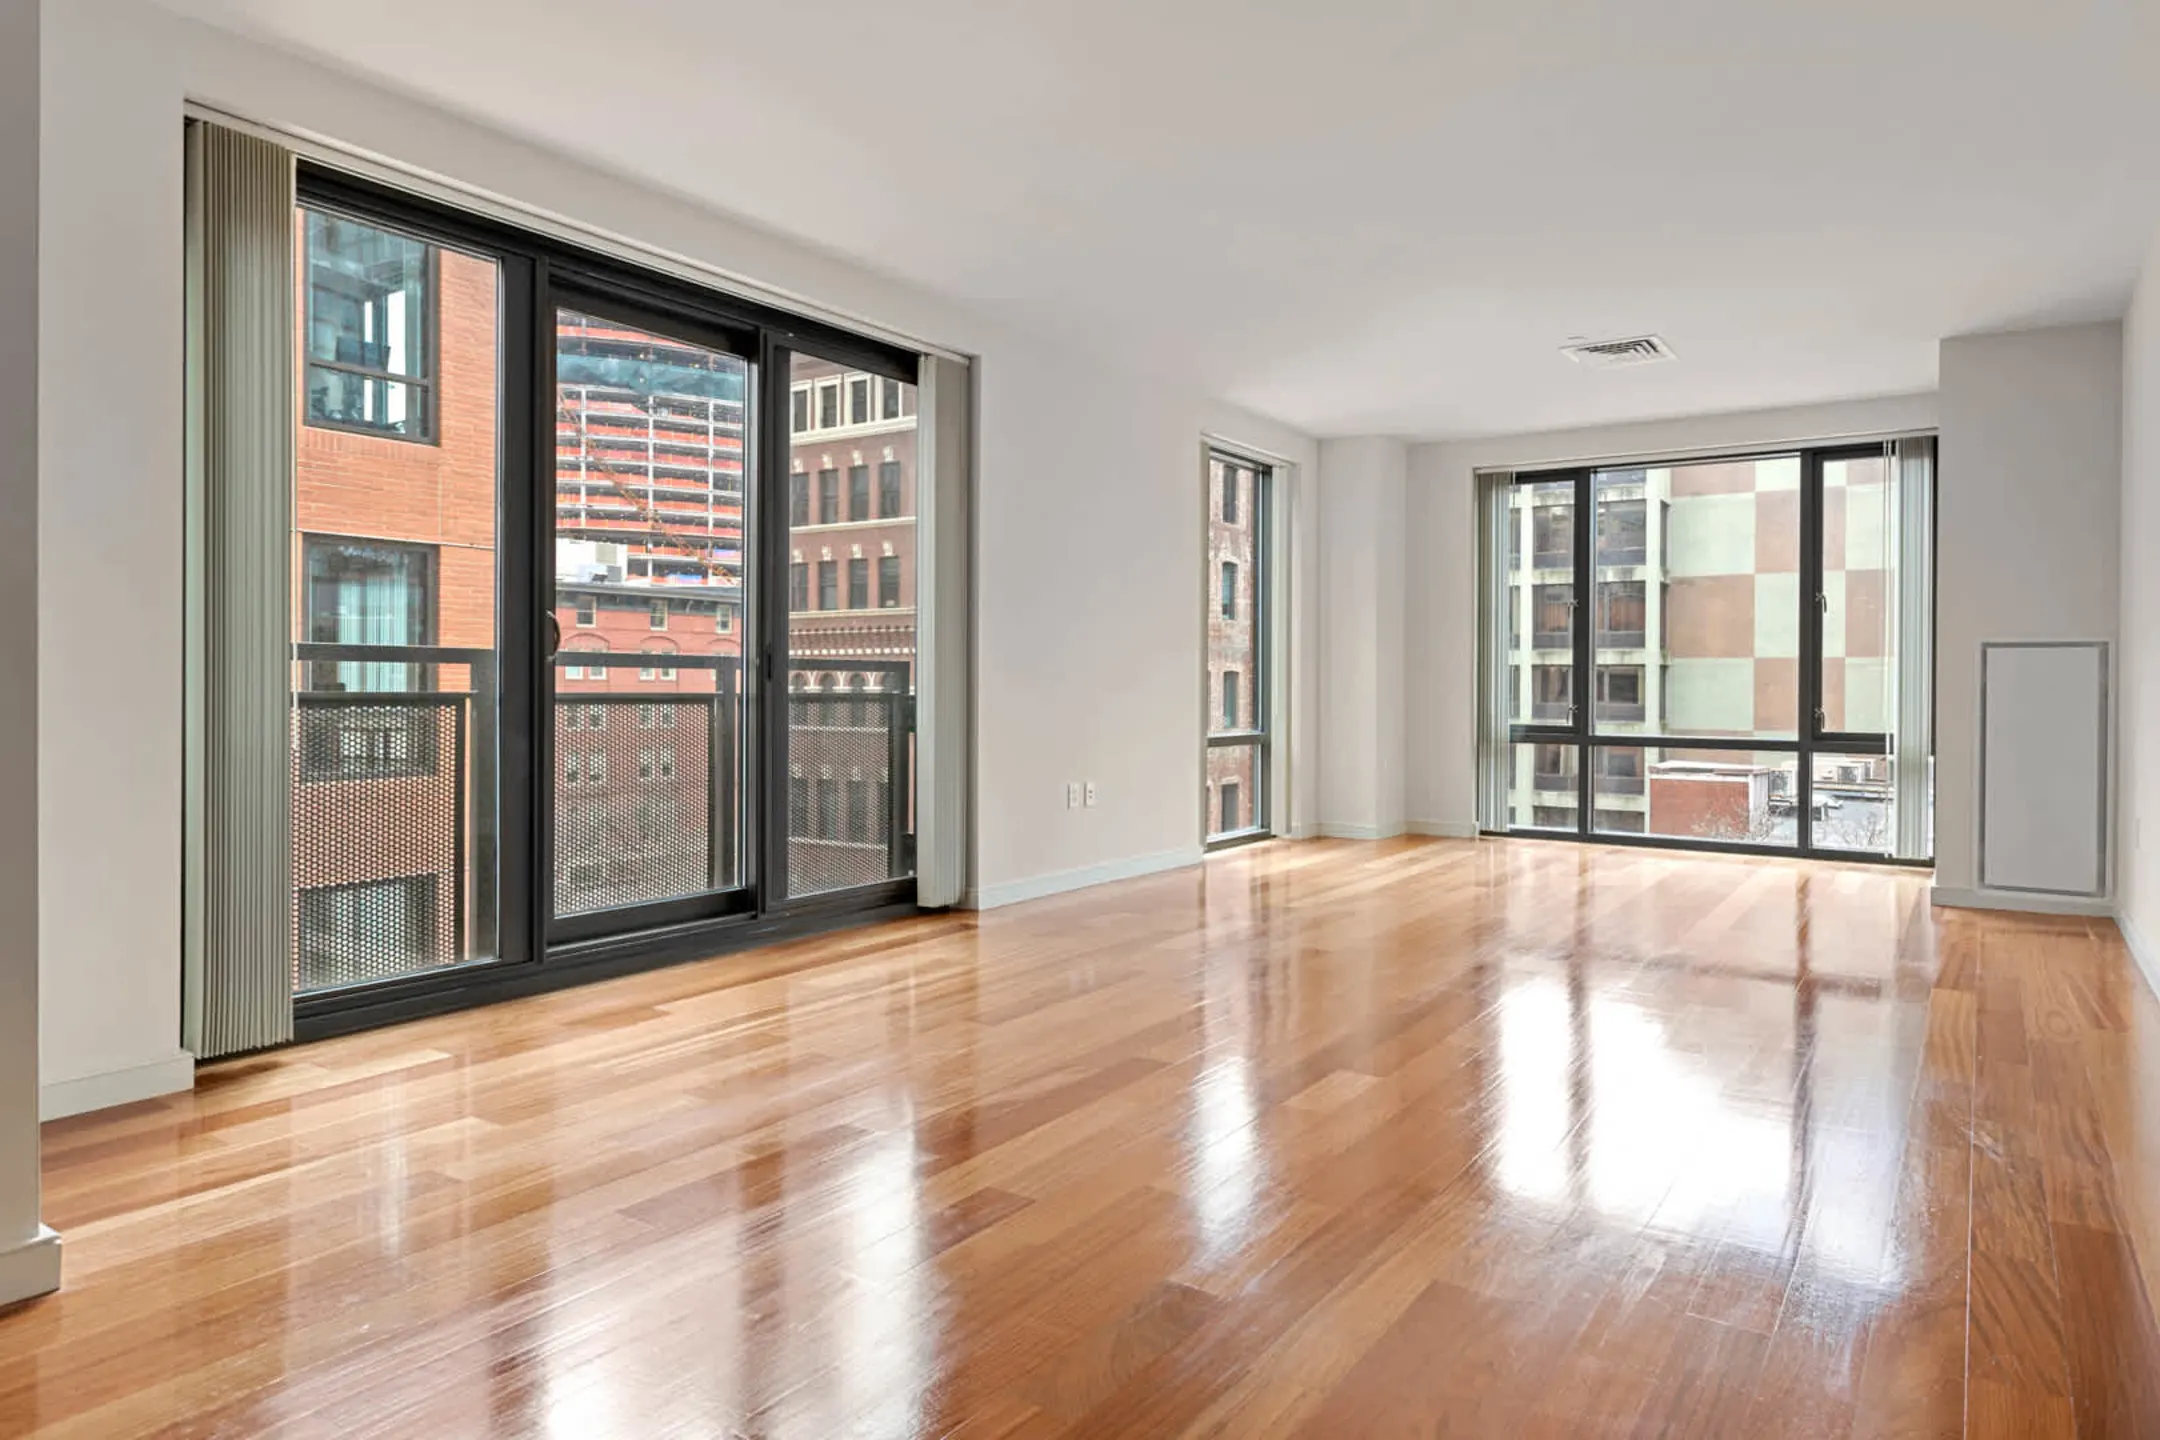 Avenir - 101 Canal St | Boston, MA Apartments for Rent | Rent.